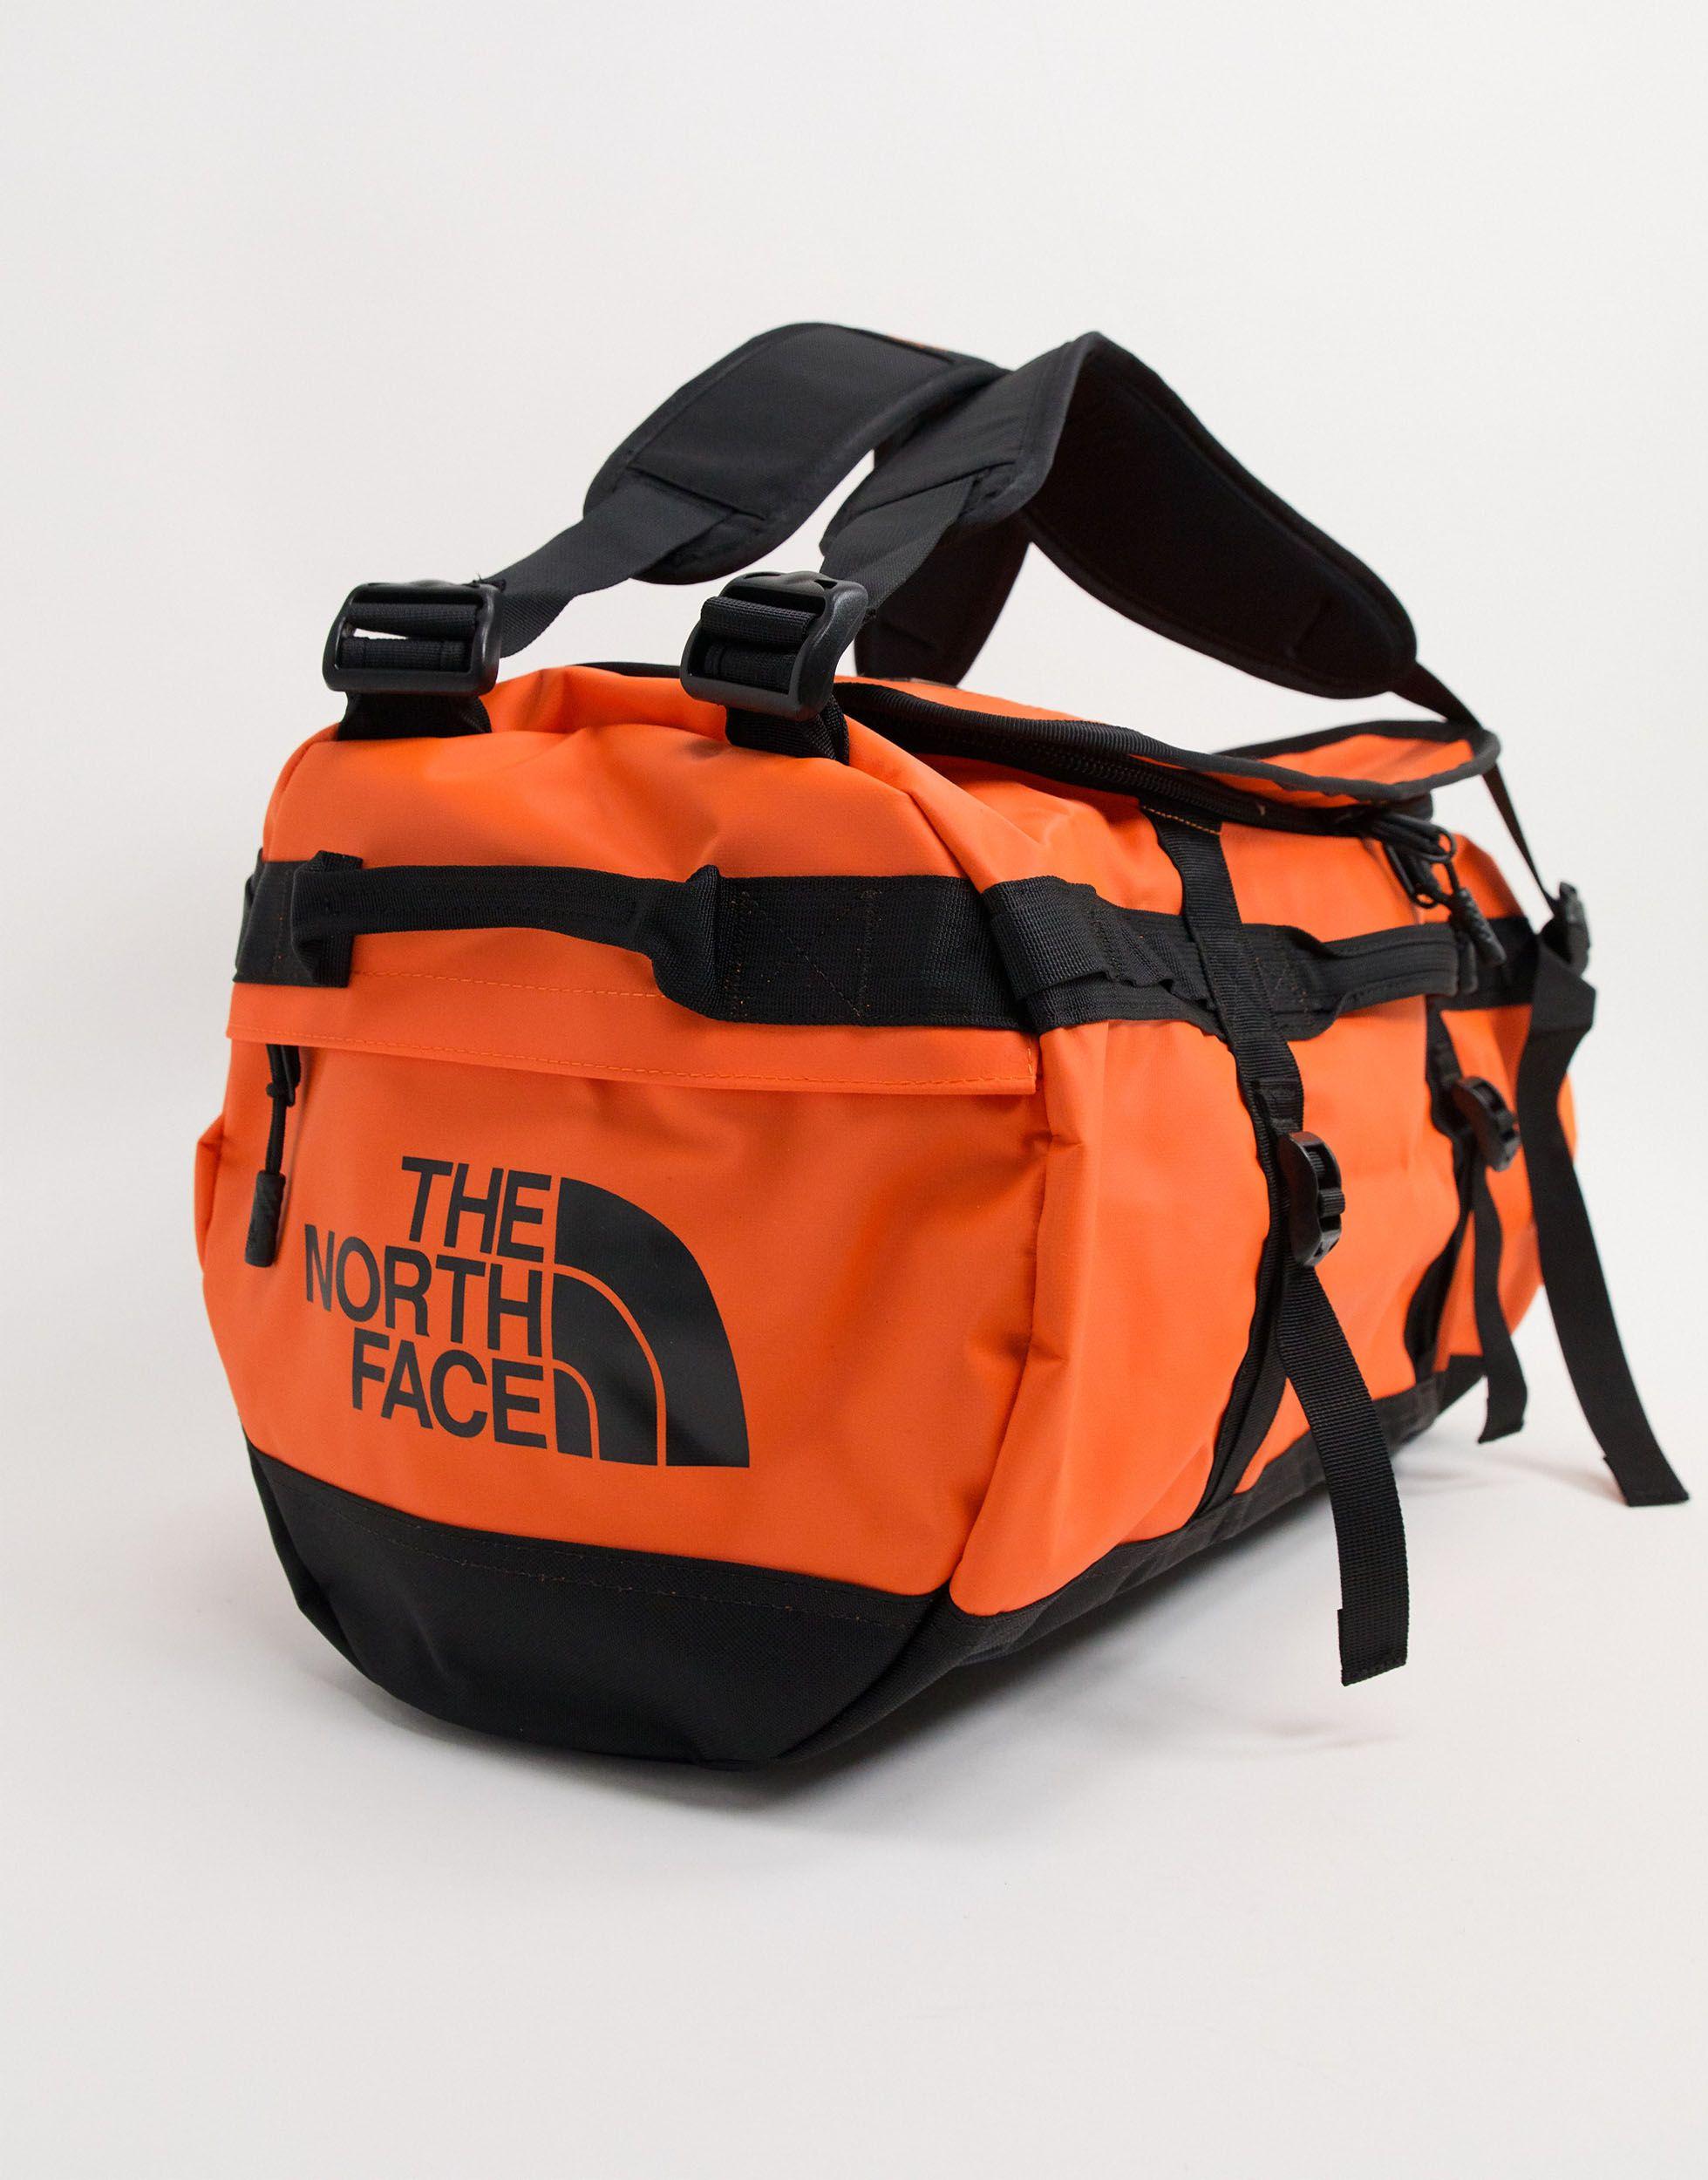 The North Face Synthetic Base Camp Duffel - M in Orange for Men - Lyst